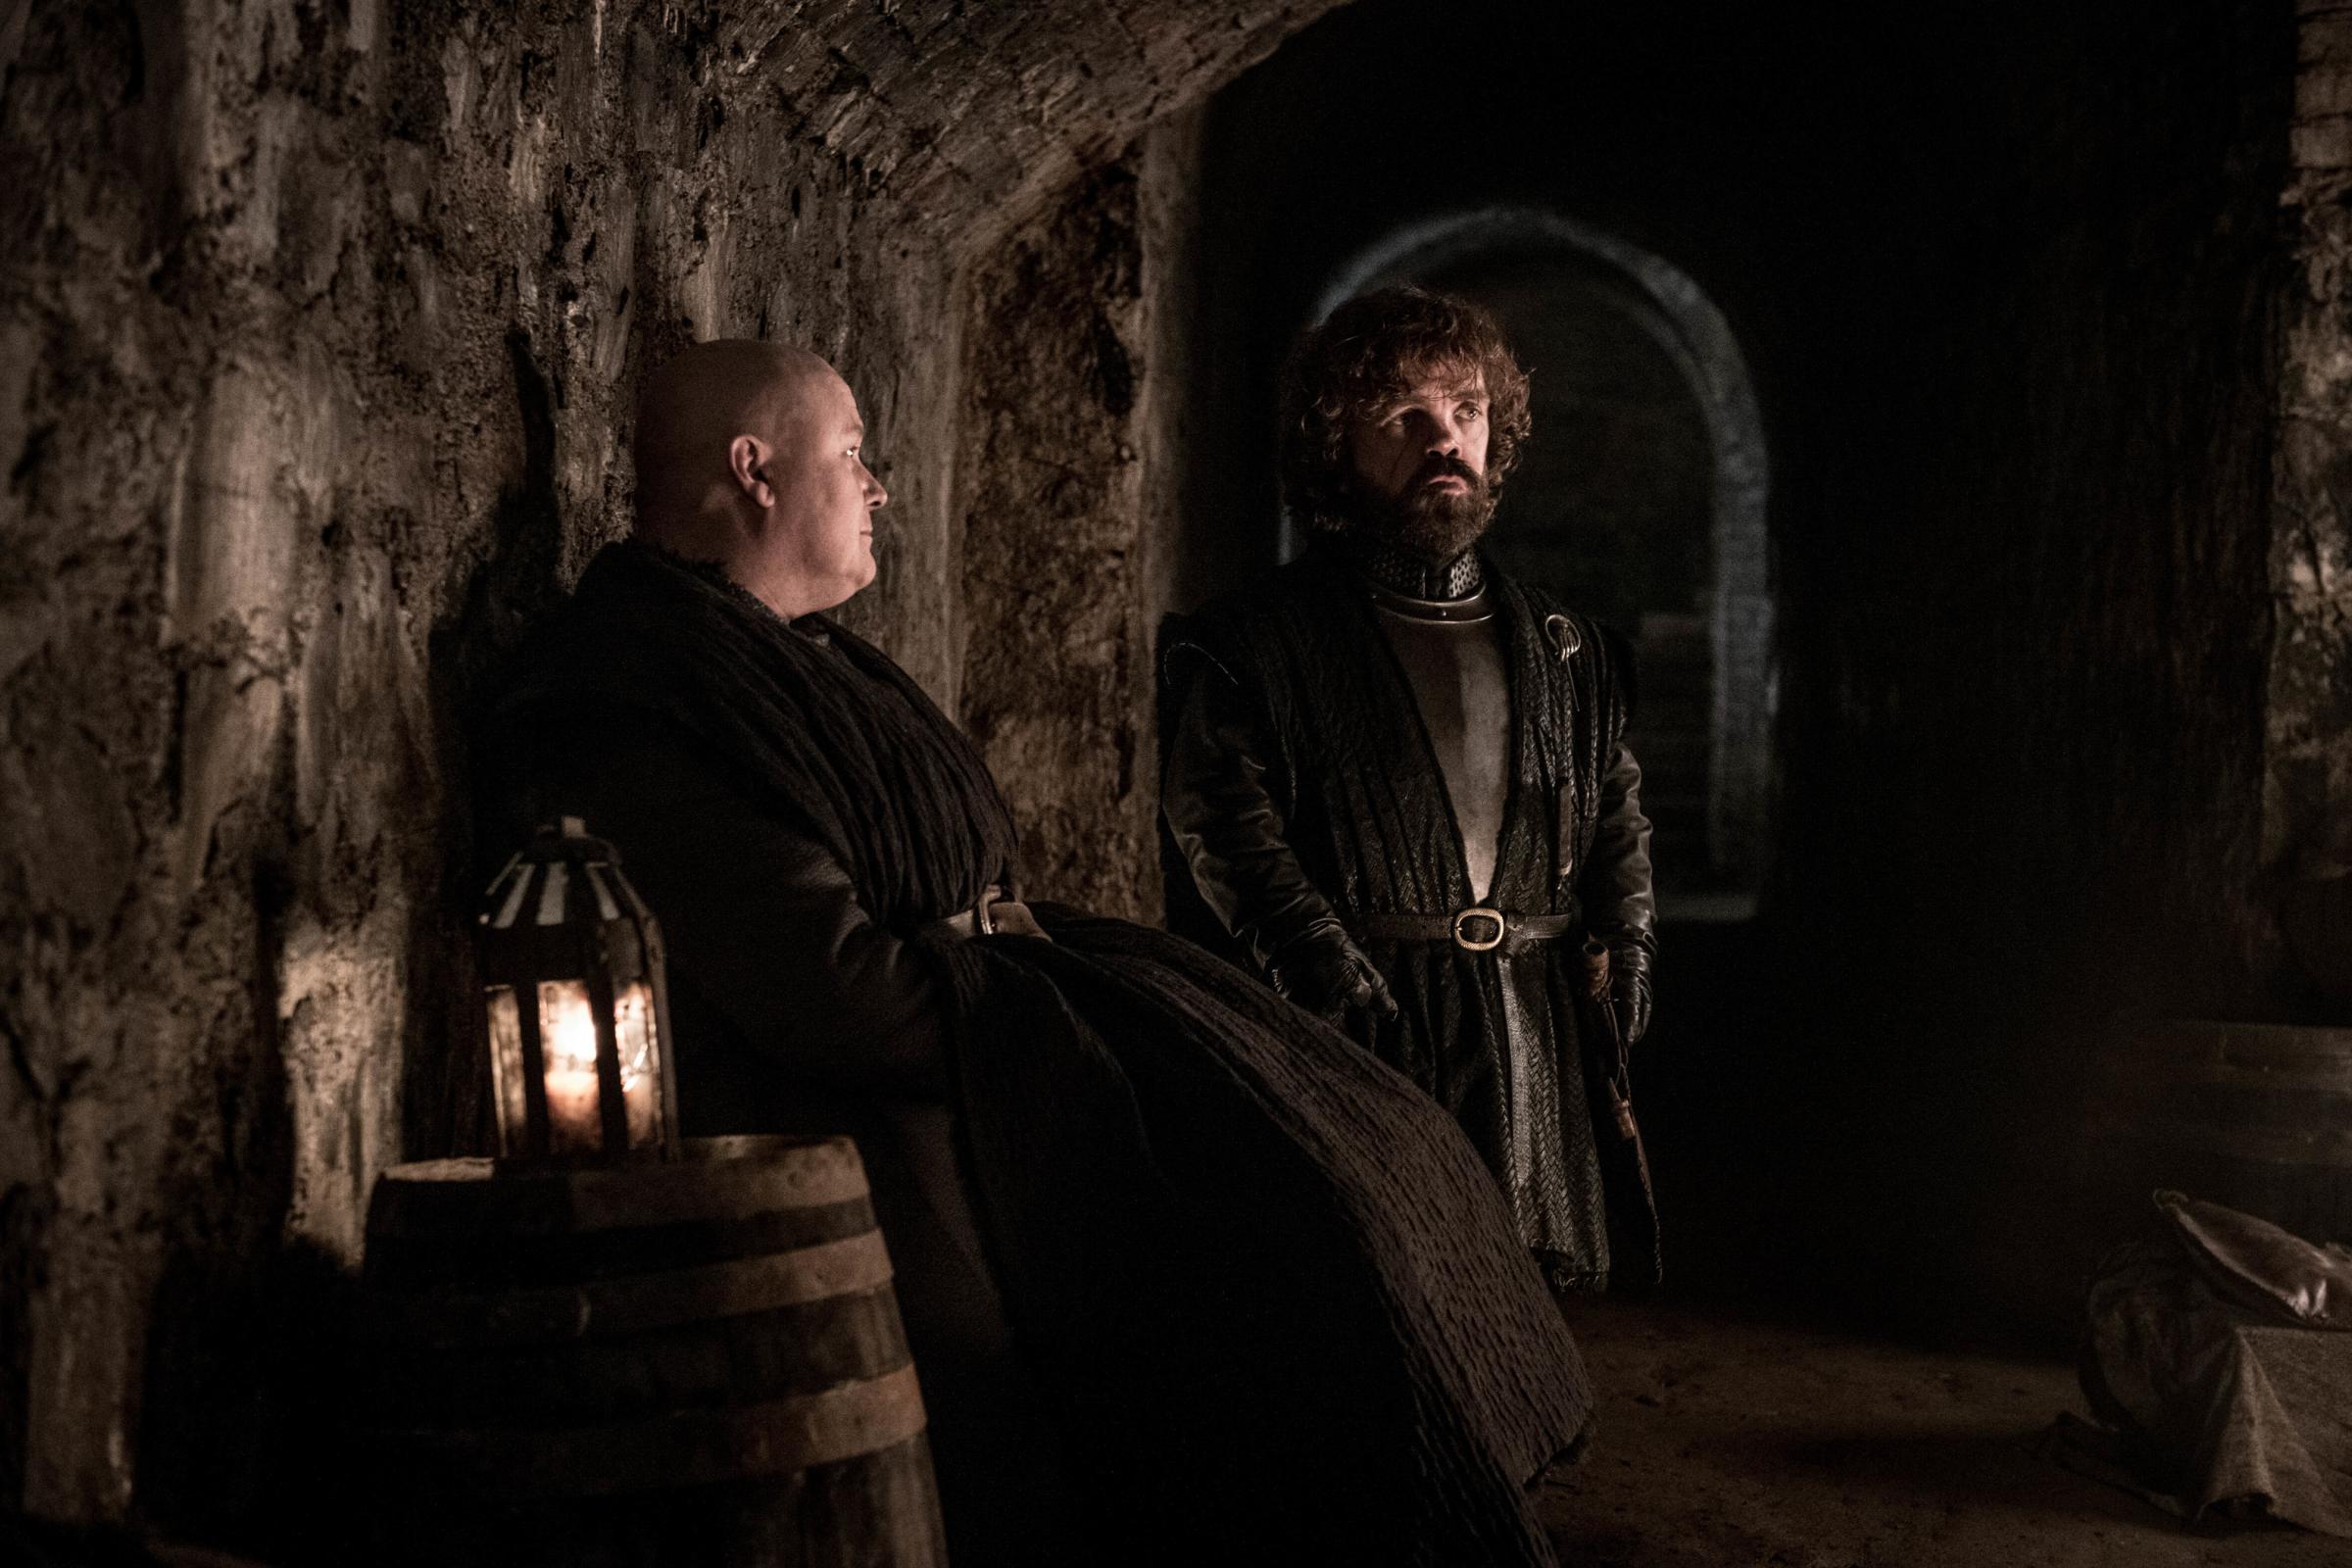 Conleth Hill as Varys and Peter Dinklage as Tyrion Lannister.